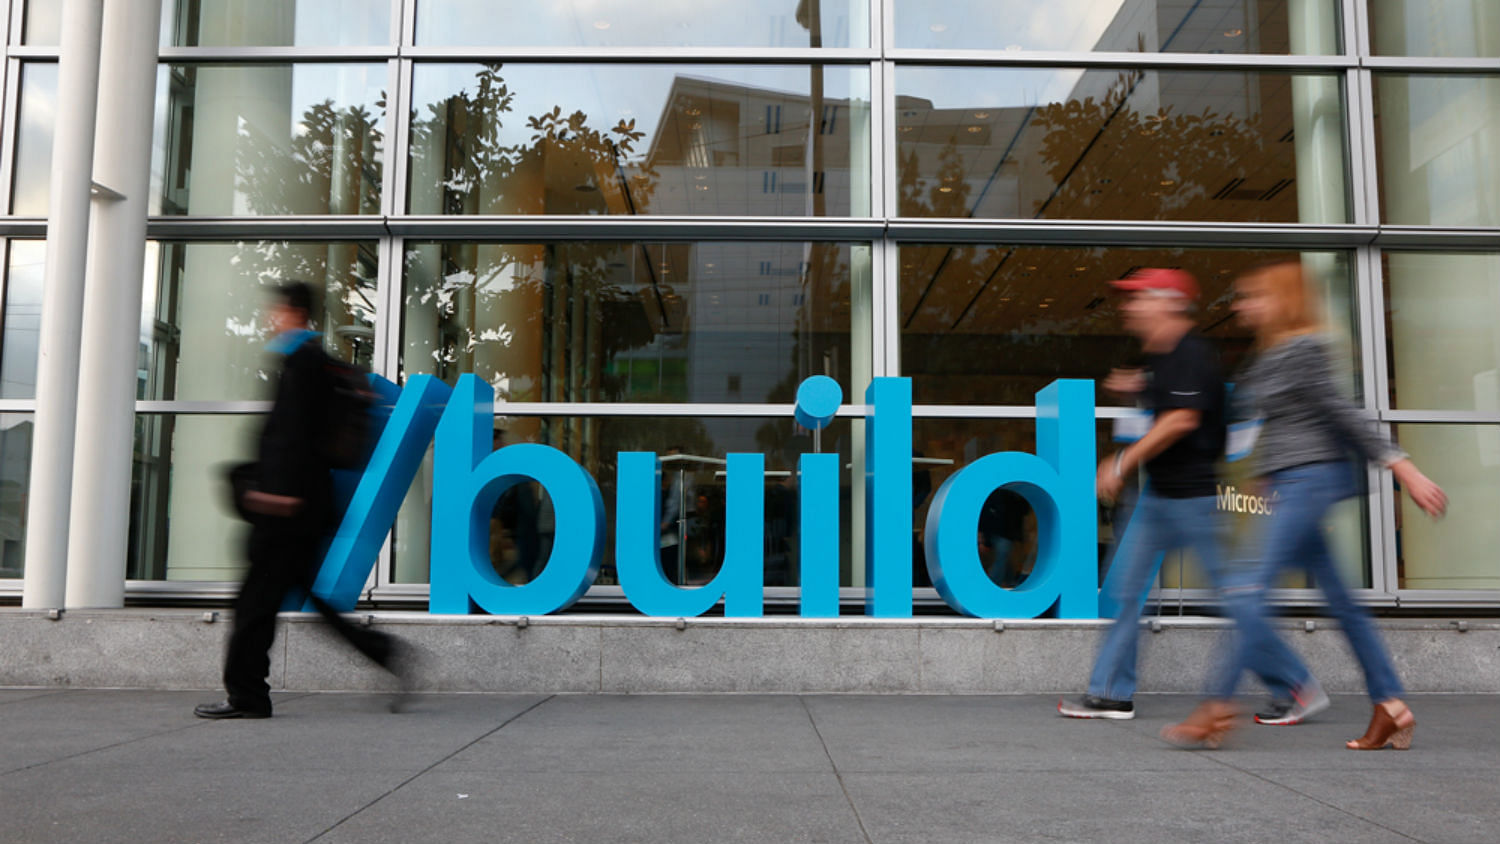 Microsoft Build 2016 goes on from 30 March to 1 April.&nbsp;